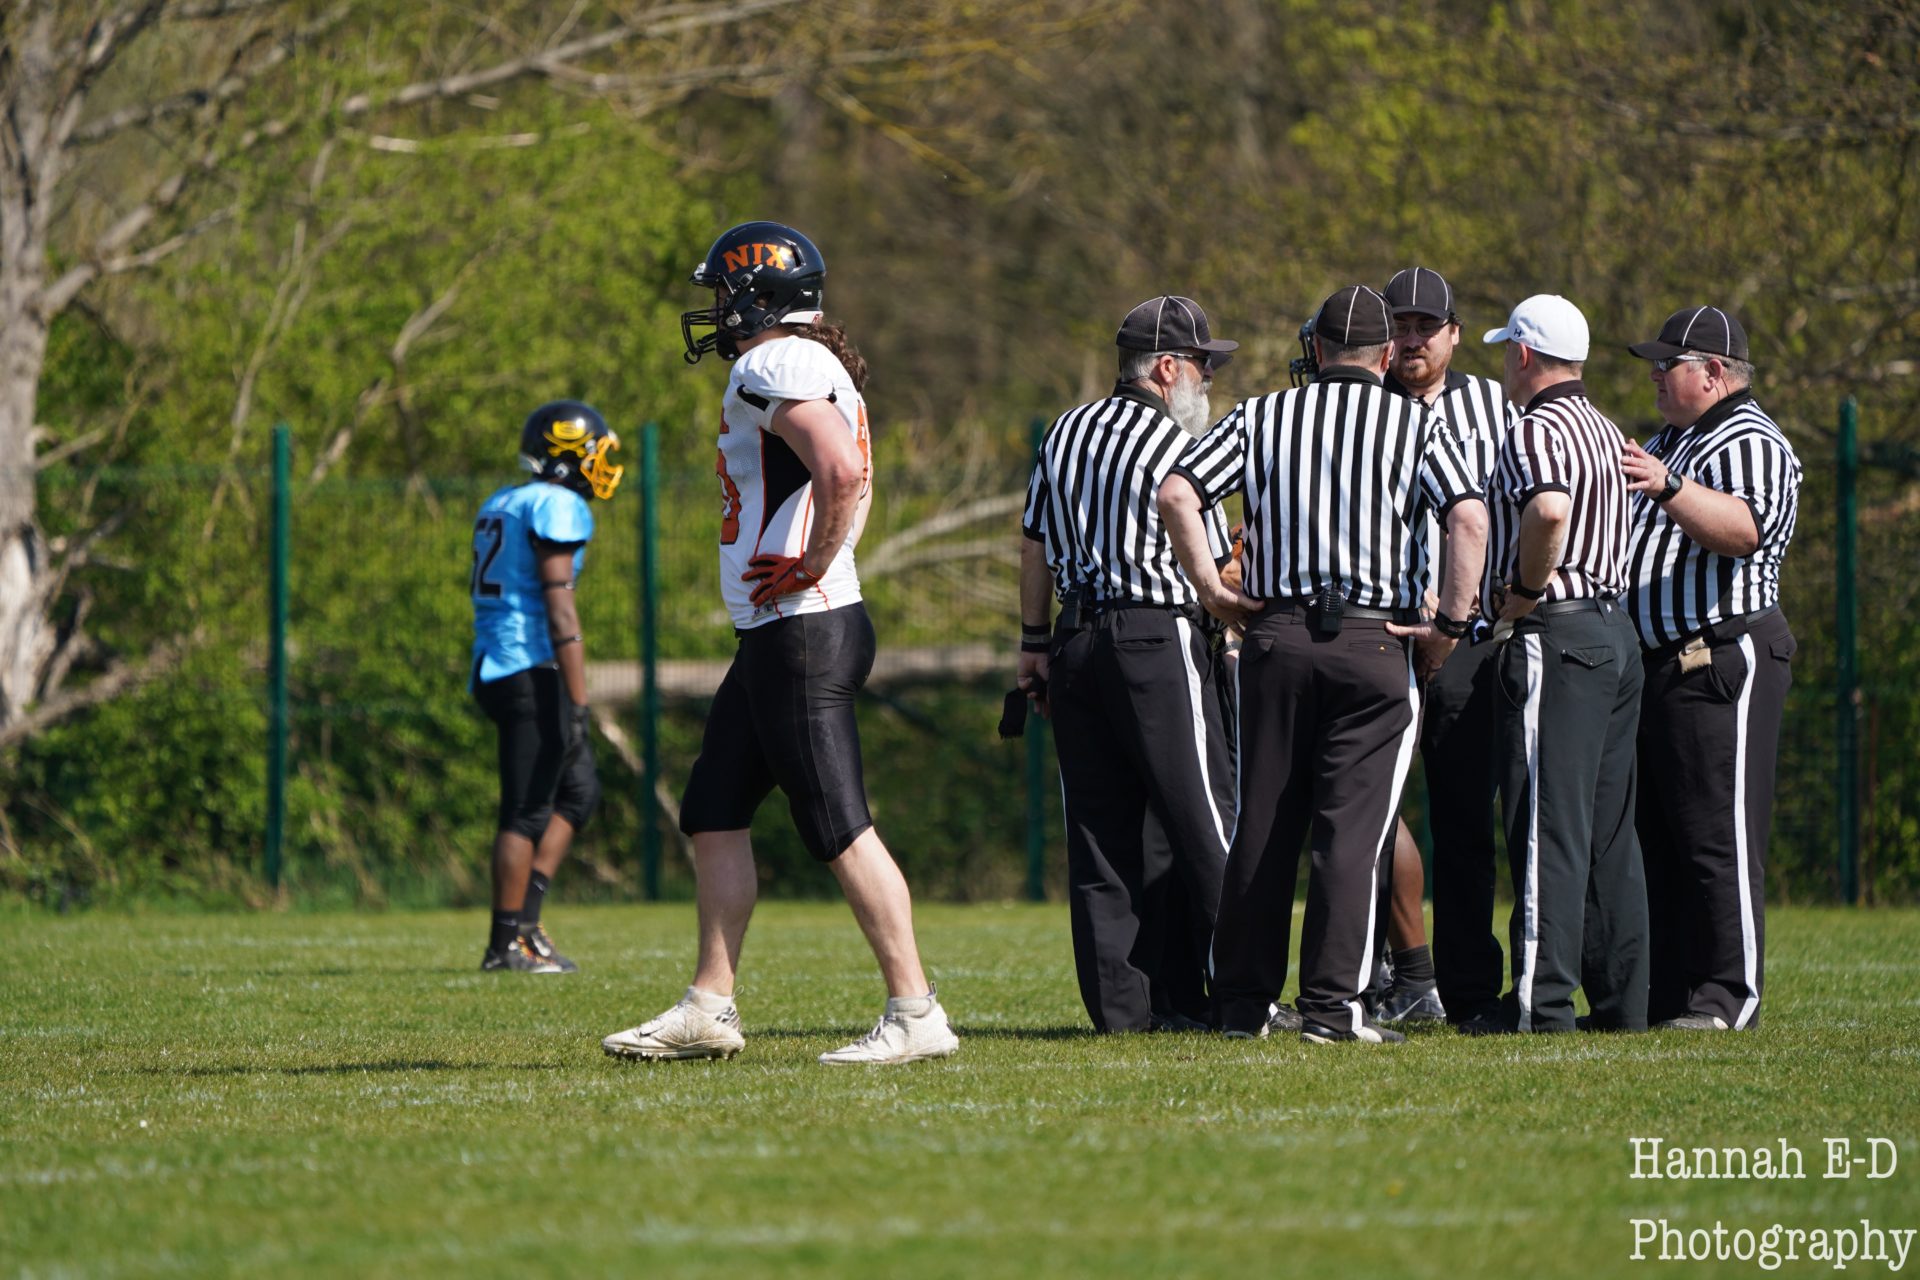 Increase to game fees for officials